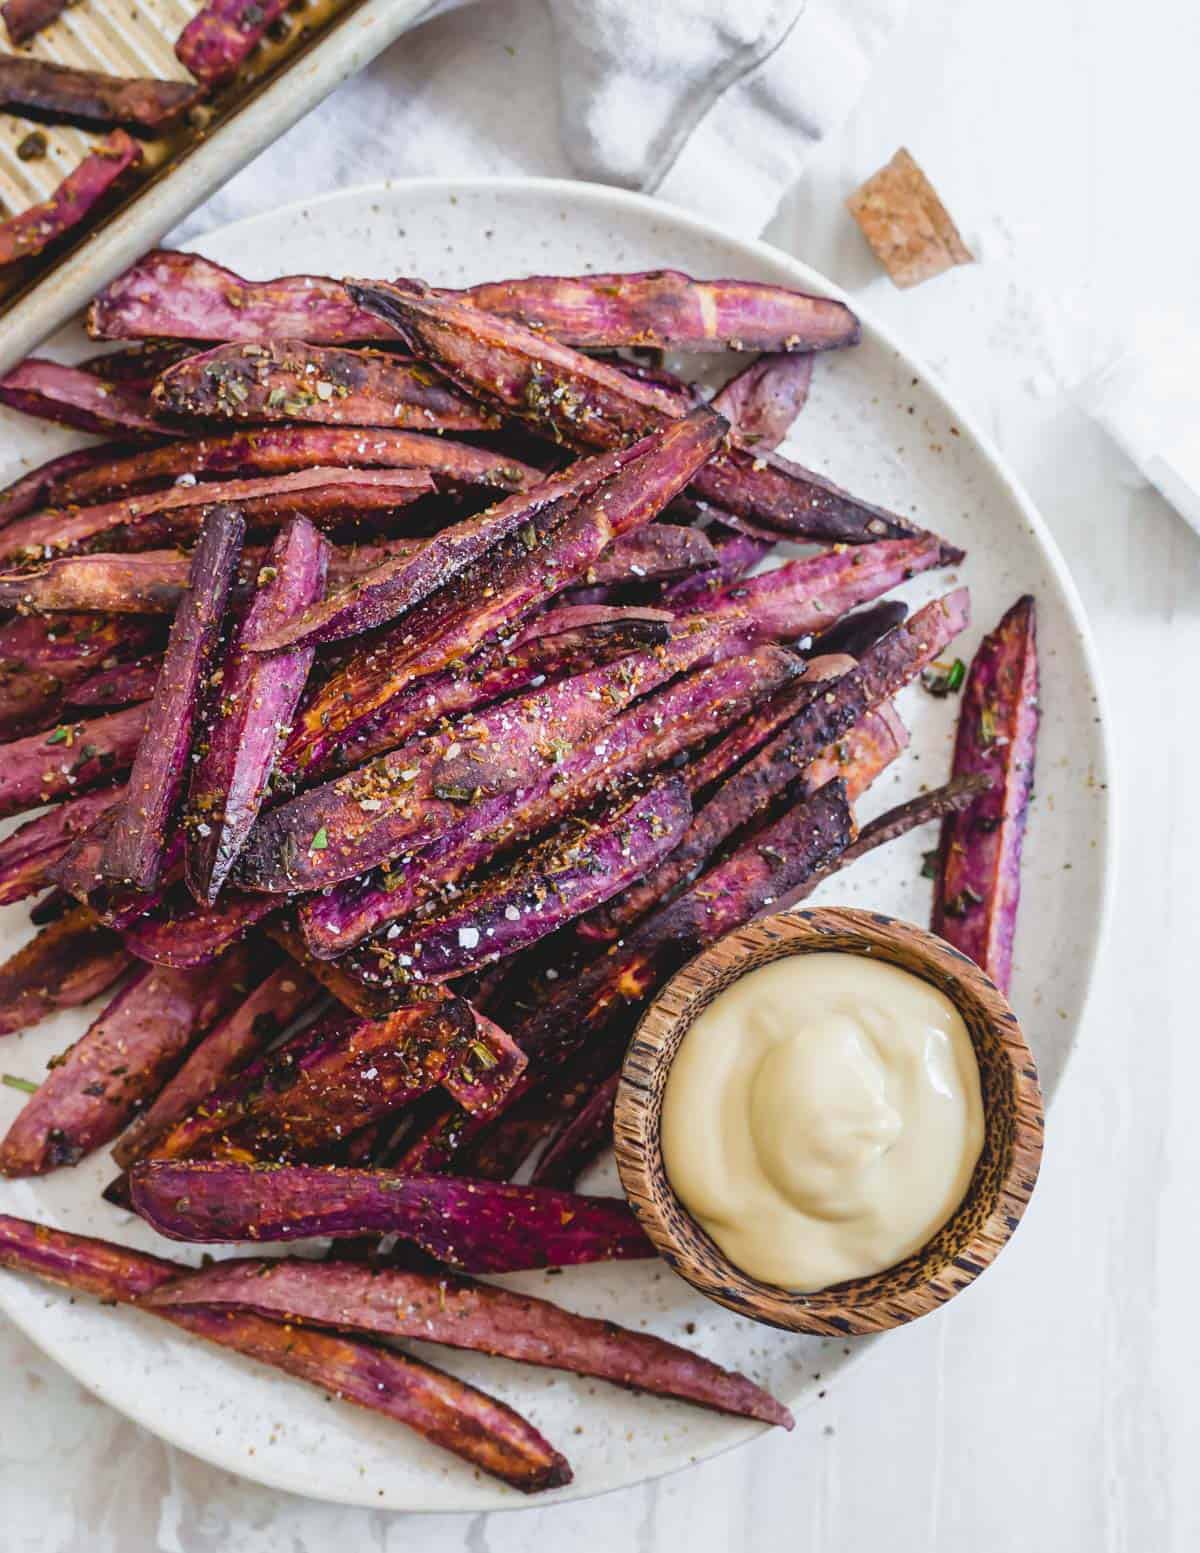 Crispy oven baked purple sweet potato fries with fresh herbs and sea salt on a plate.